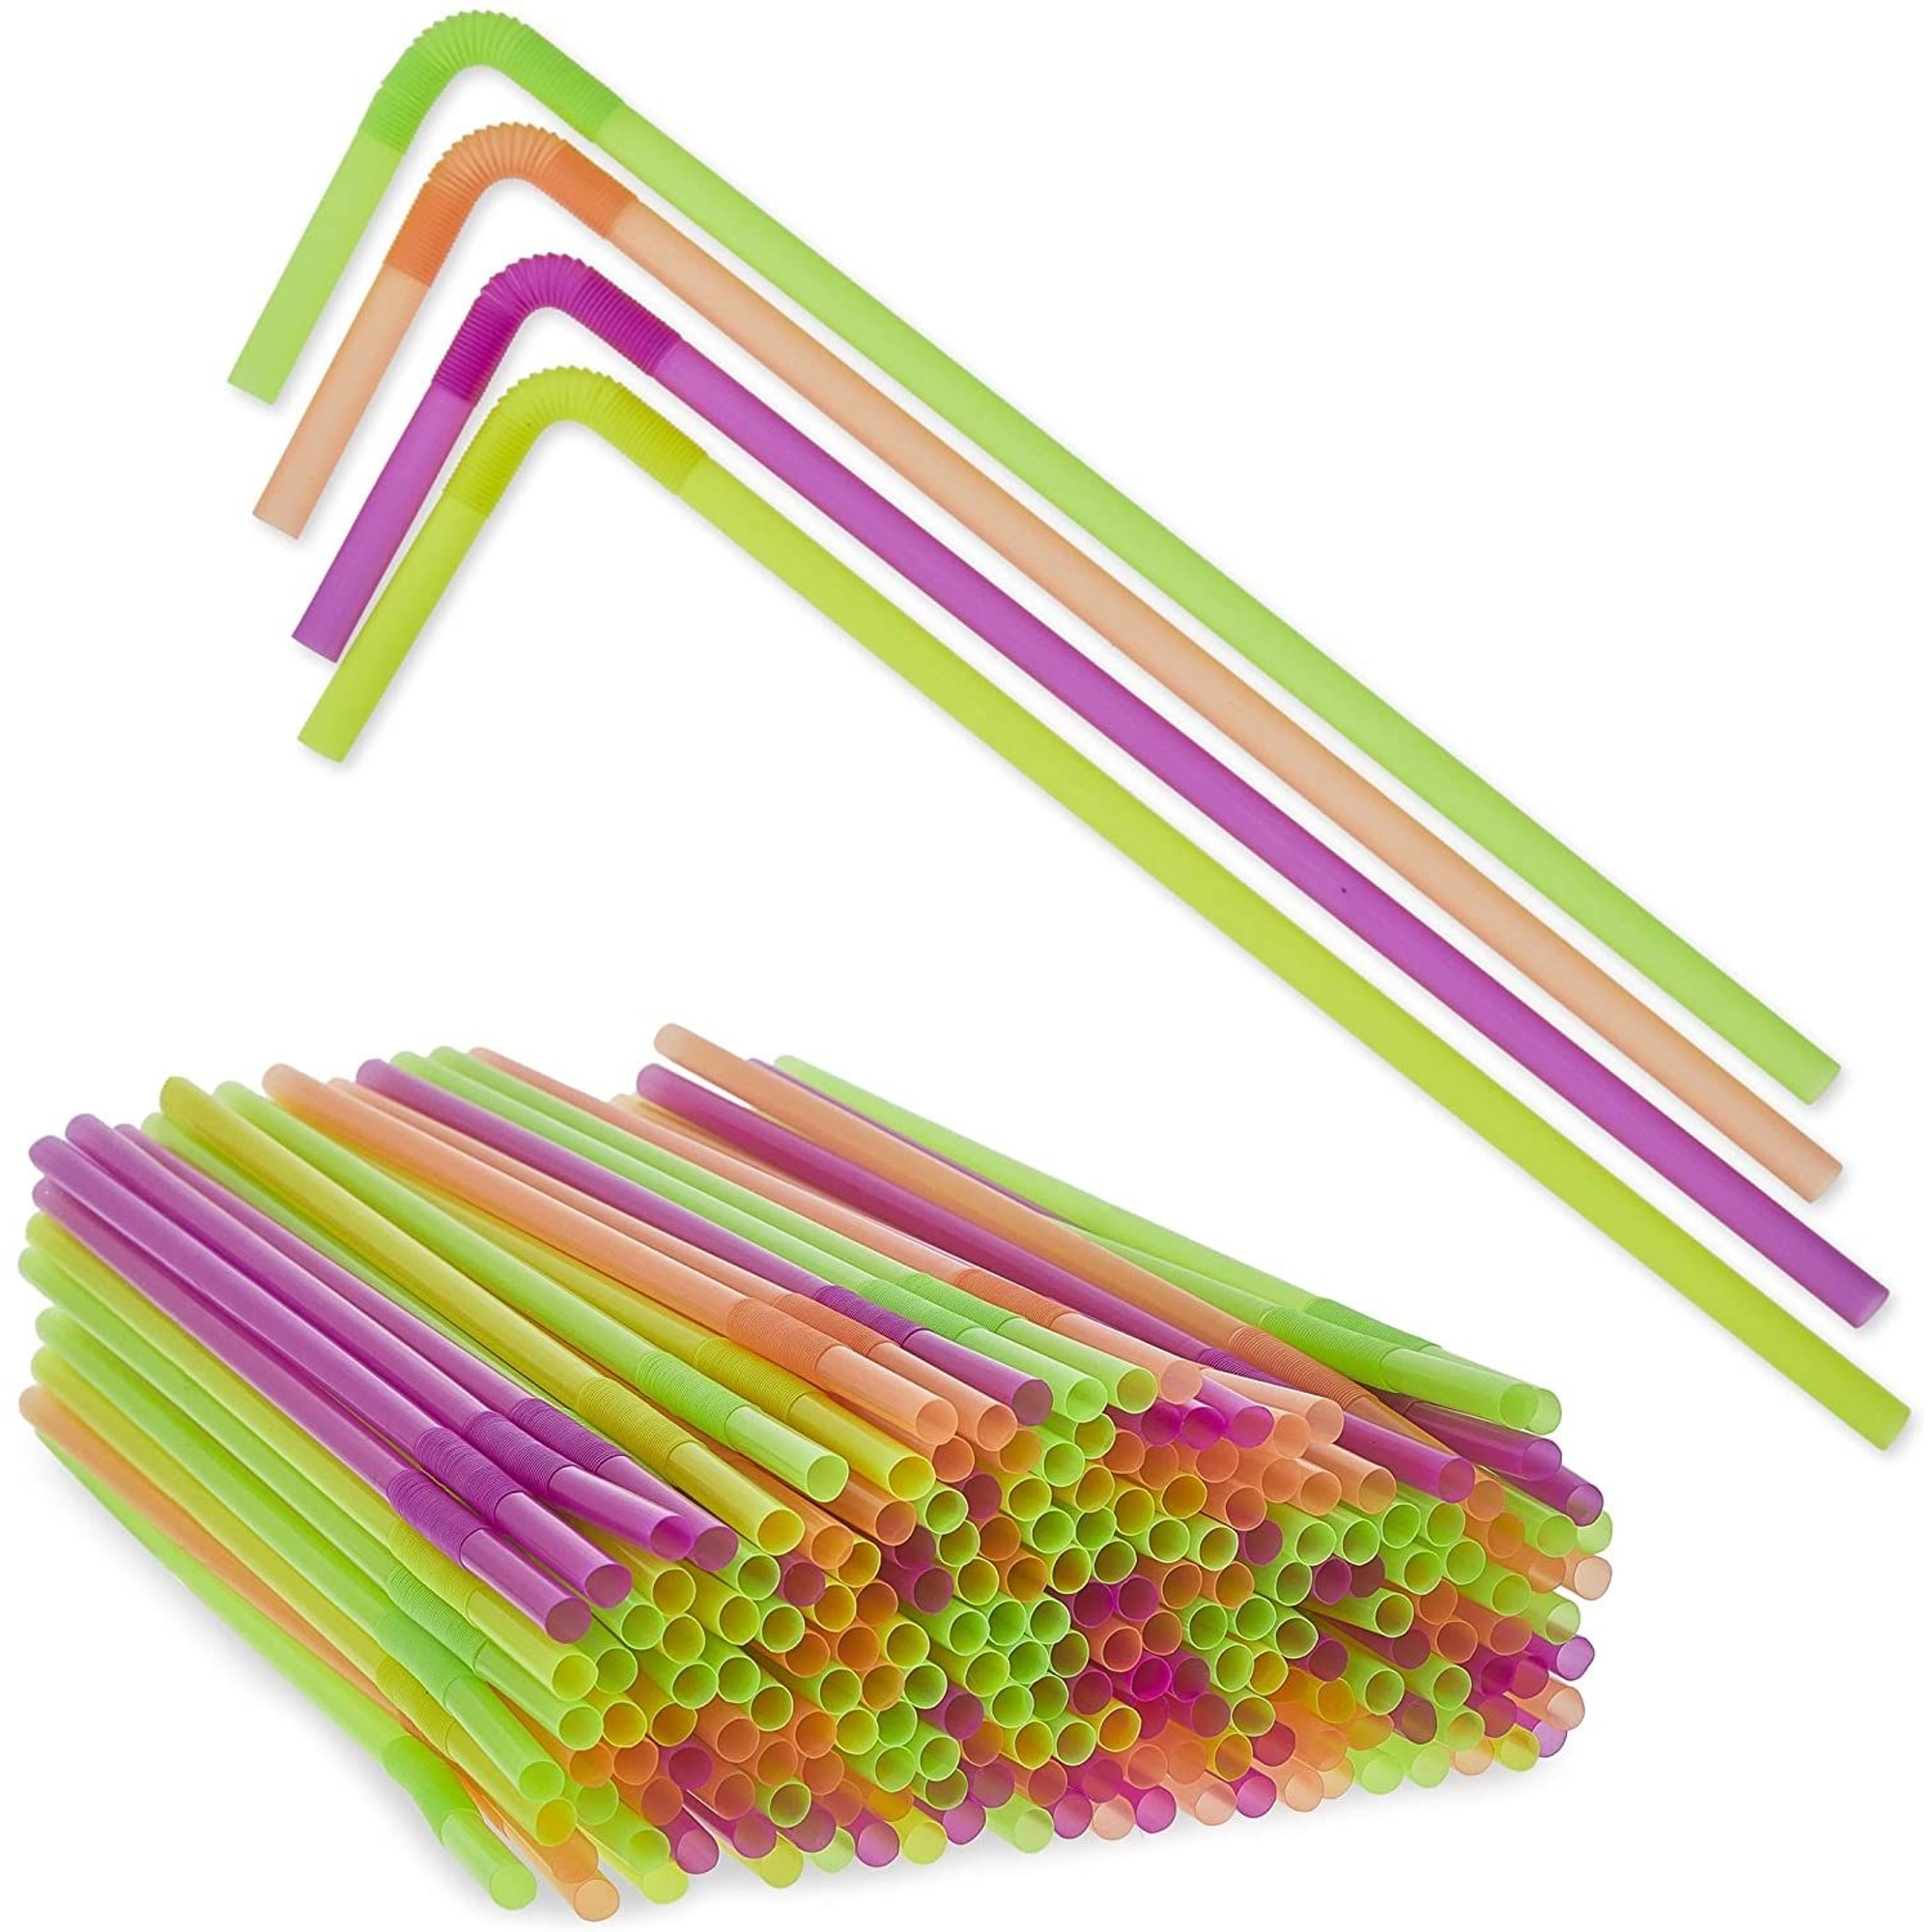 https://ak1.ostkcdn.com/images/products/is/images/direct/7c6e02ac3d111a6f171ce34c57f045329985d60b/Plastic-Drinking-Straws%2C-Single-Use-Bendable-Straws-%284-Colors%2C-13-In%2C-200-Pack%29.jpg